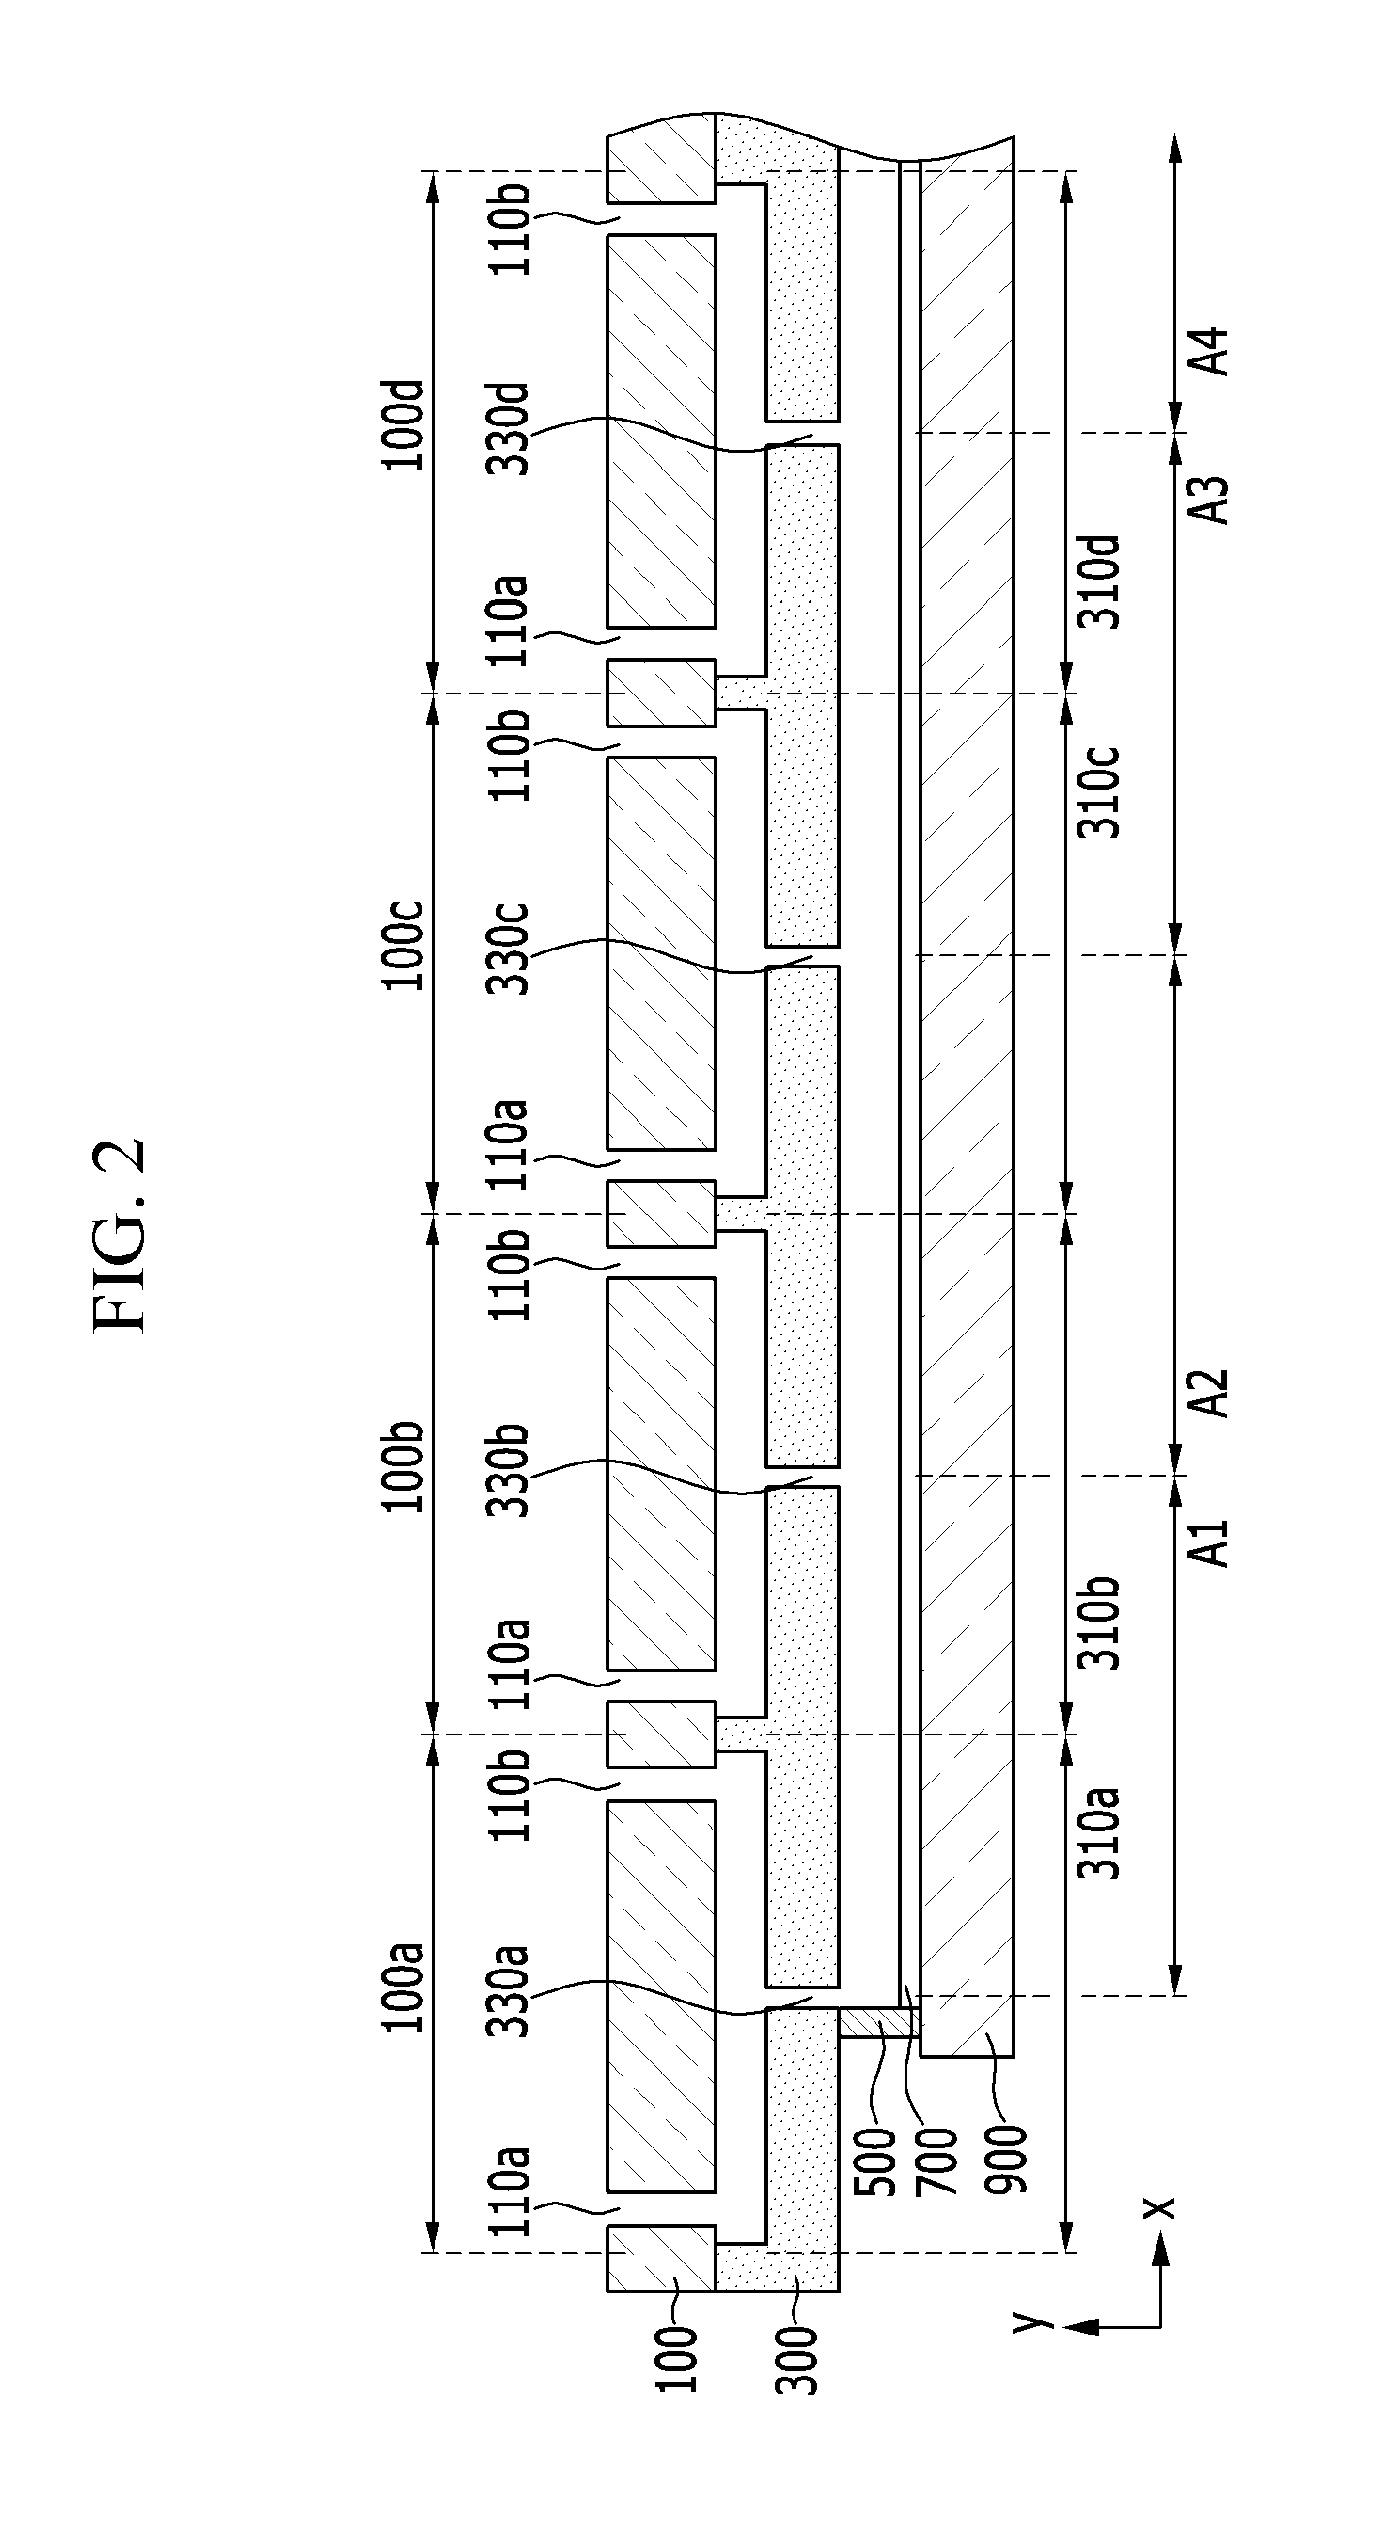 Atomic layer deposition apparatus and method of atomic layer deposition using the same